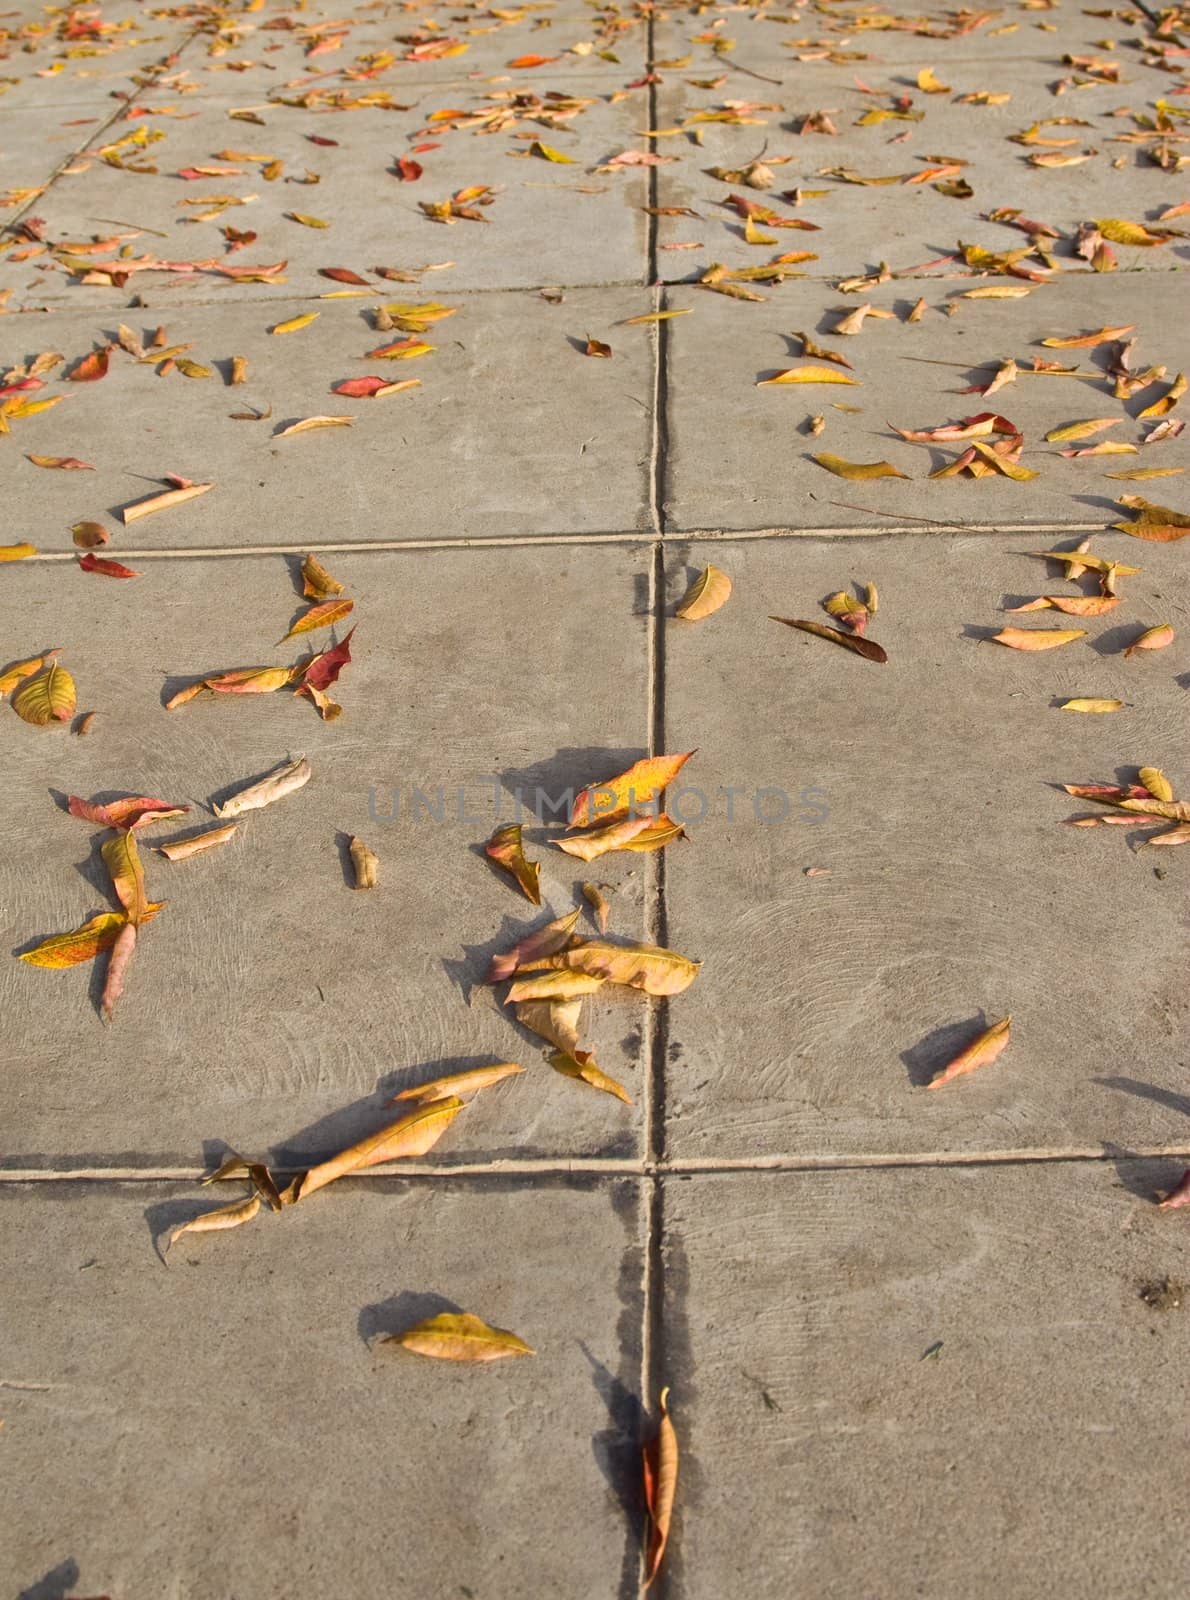 Fallen leaves by timscottrom